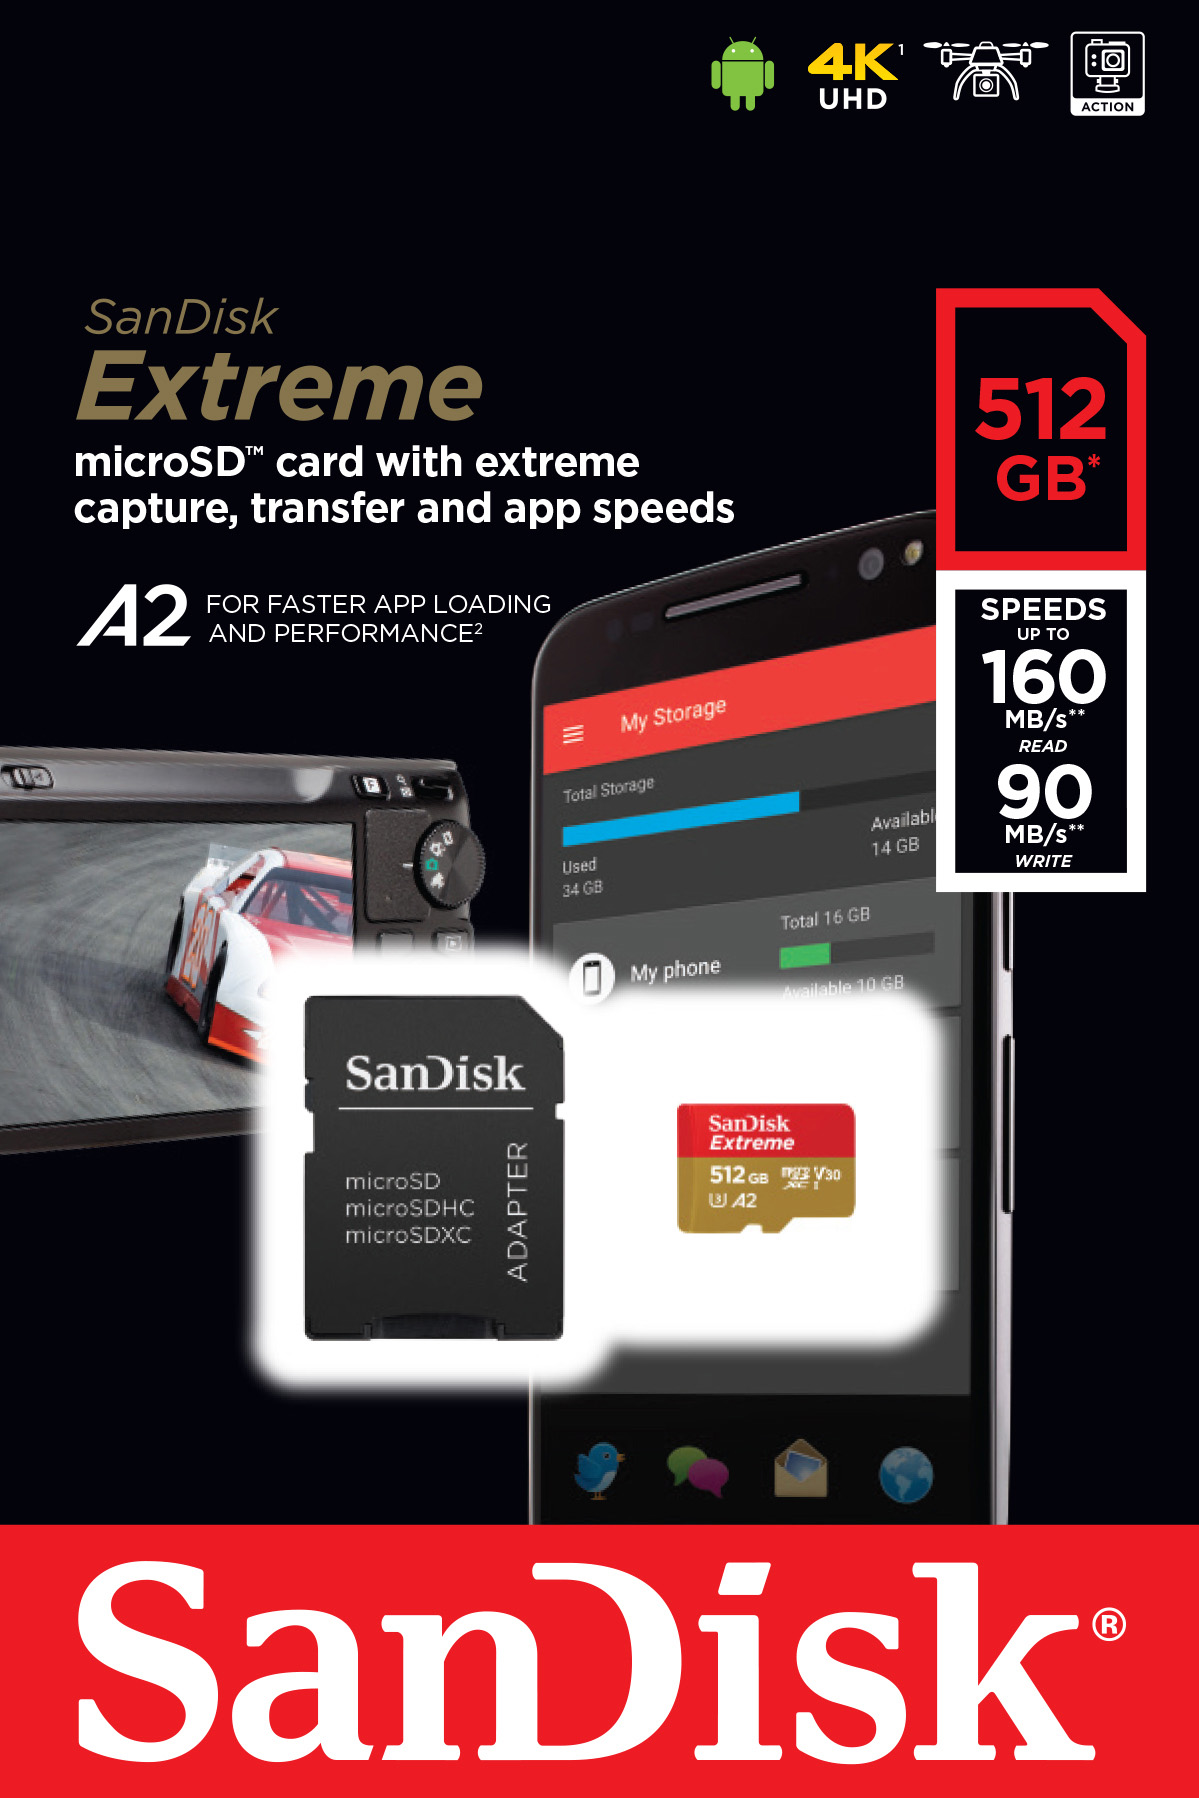 Sandisk microSDXC Card 512GB, Extreme, U3, A2, 4K UHD (R) 160MB/s, (W) 90MB/s, SD Adapter, Retail-Blister